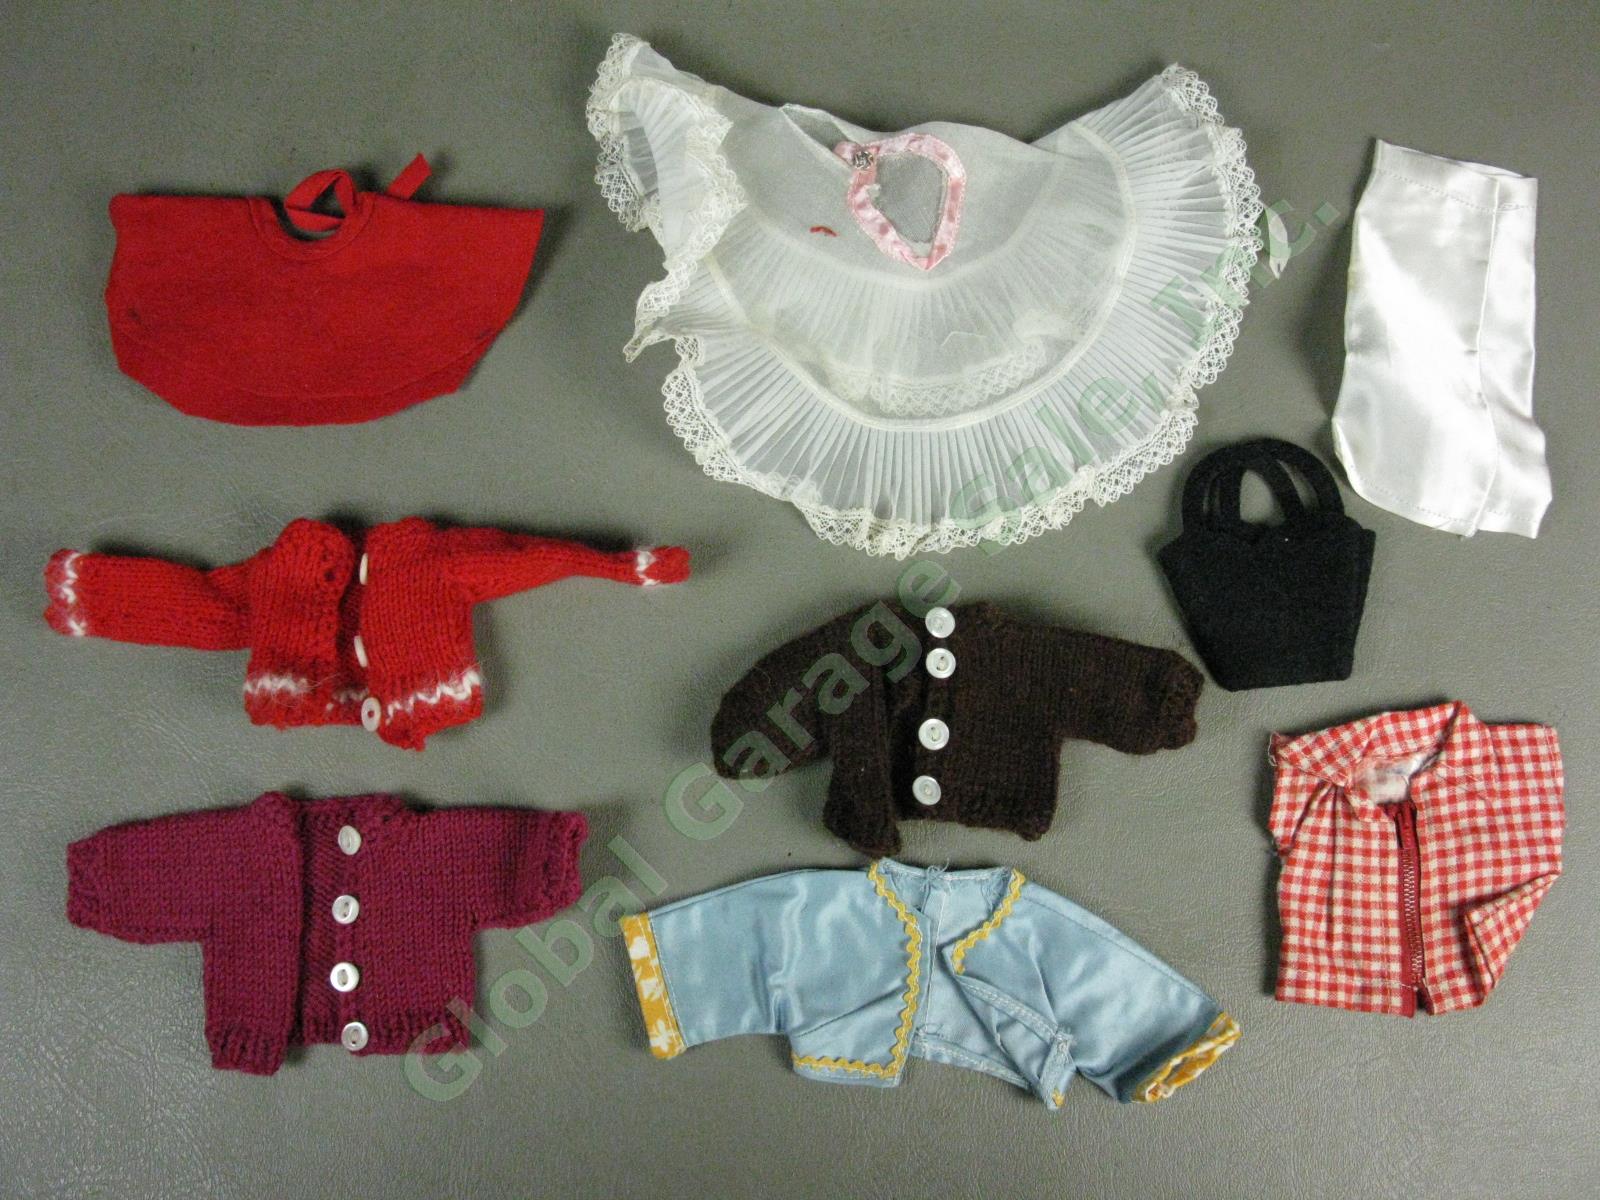 Huge Vintage 1950s Vogue Jill Doll Clothing Jewelry Accessories Collection Lot 18